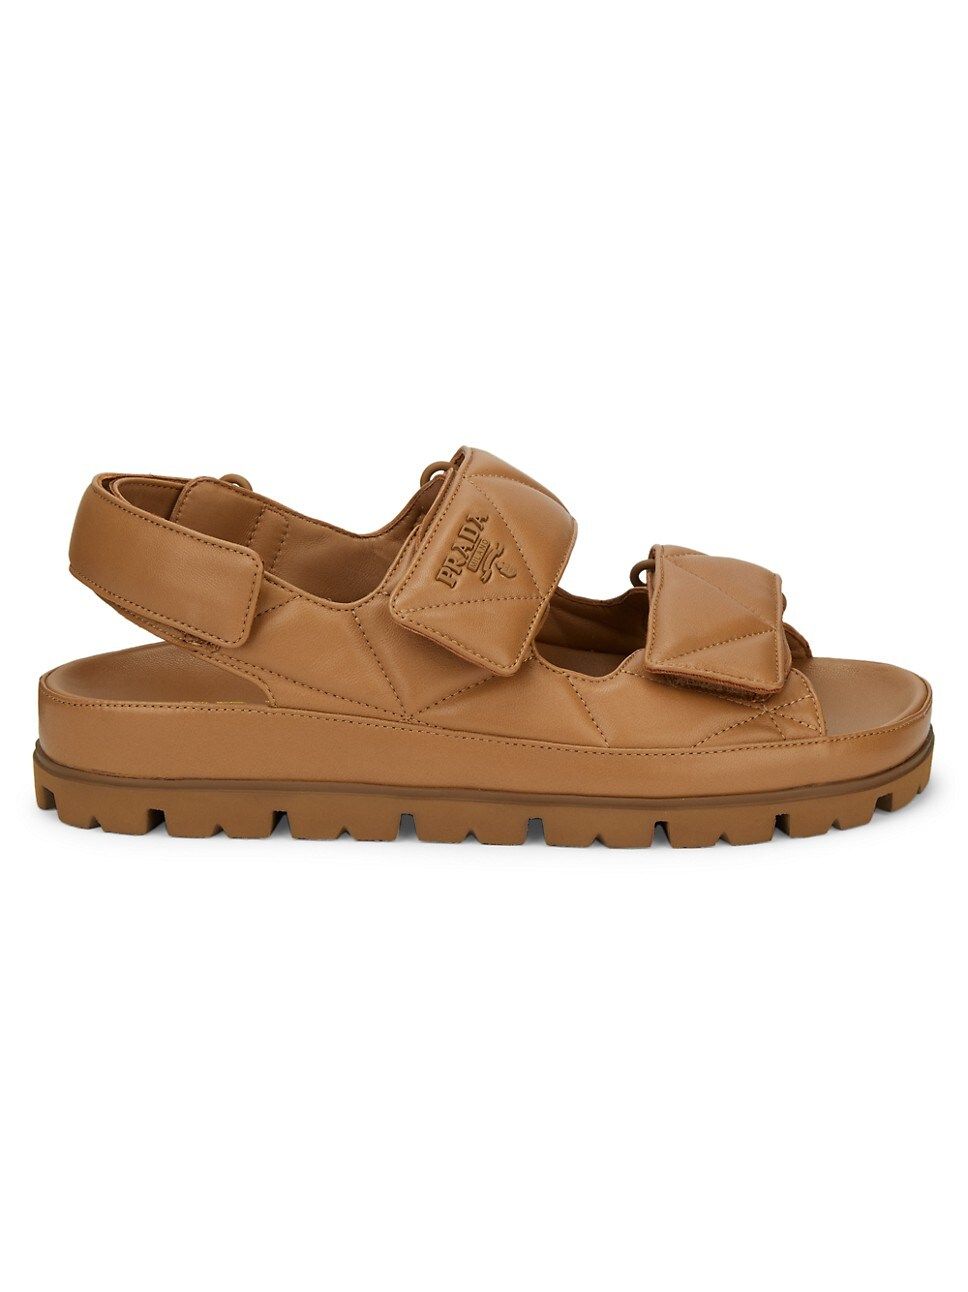 Nappa Leather Padded Sport Sandals | Saks Fifth Avenue